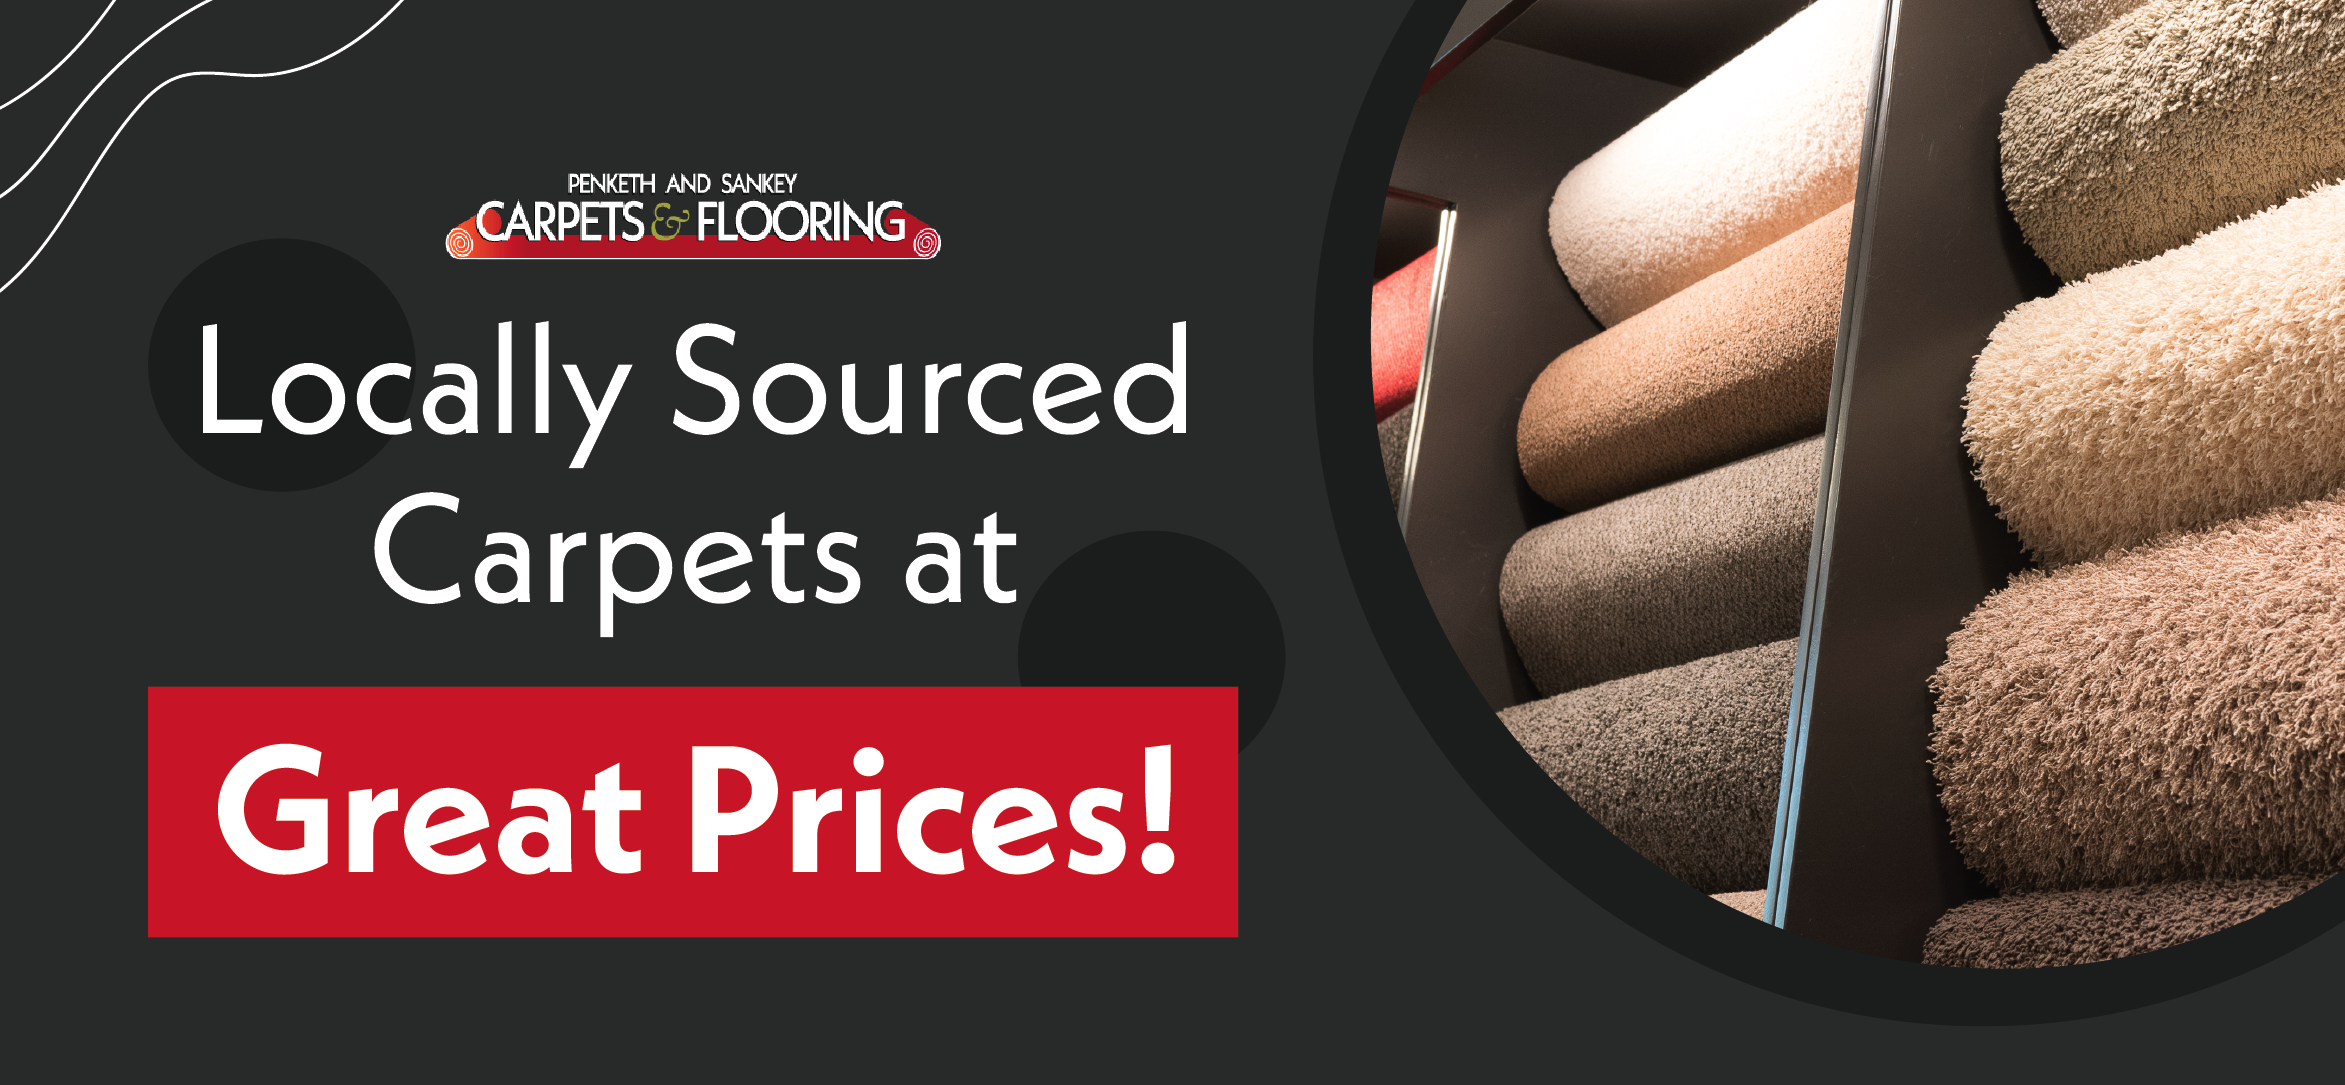 Locally sourced carpets at great prices!